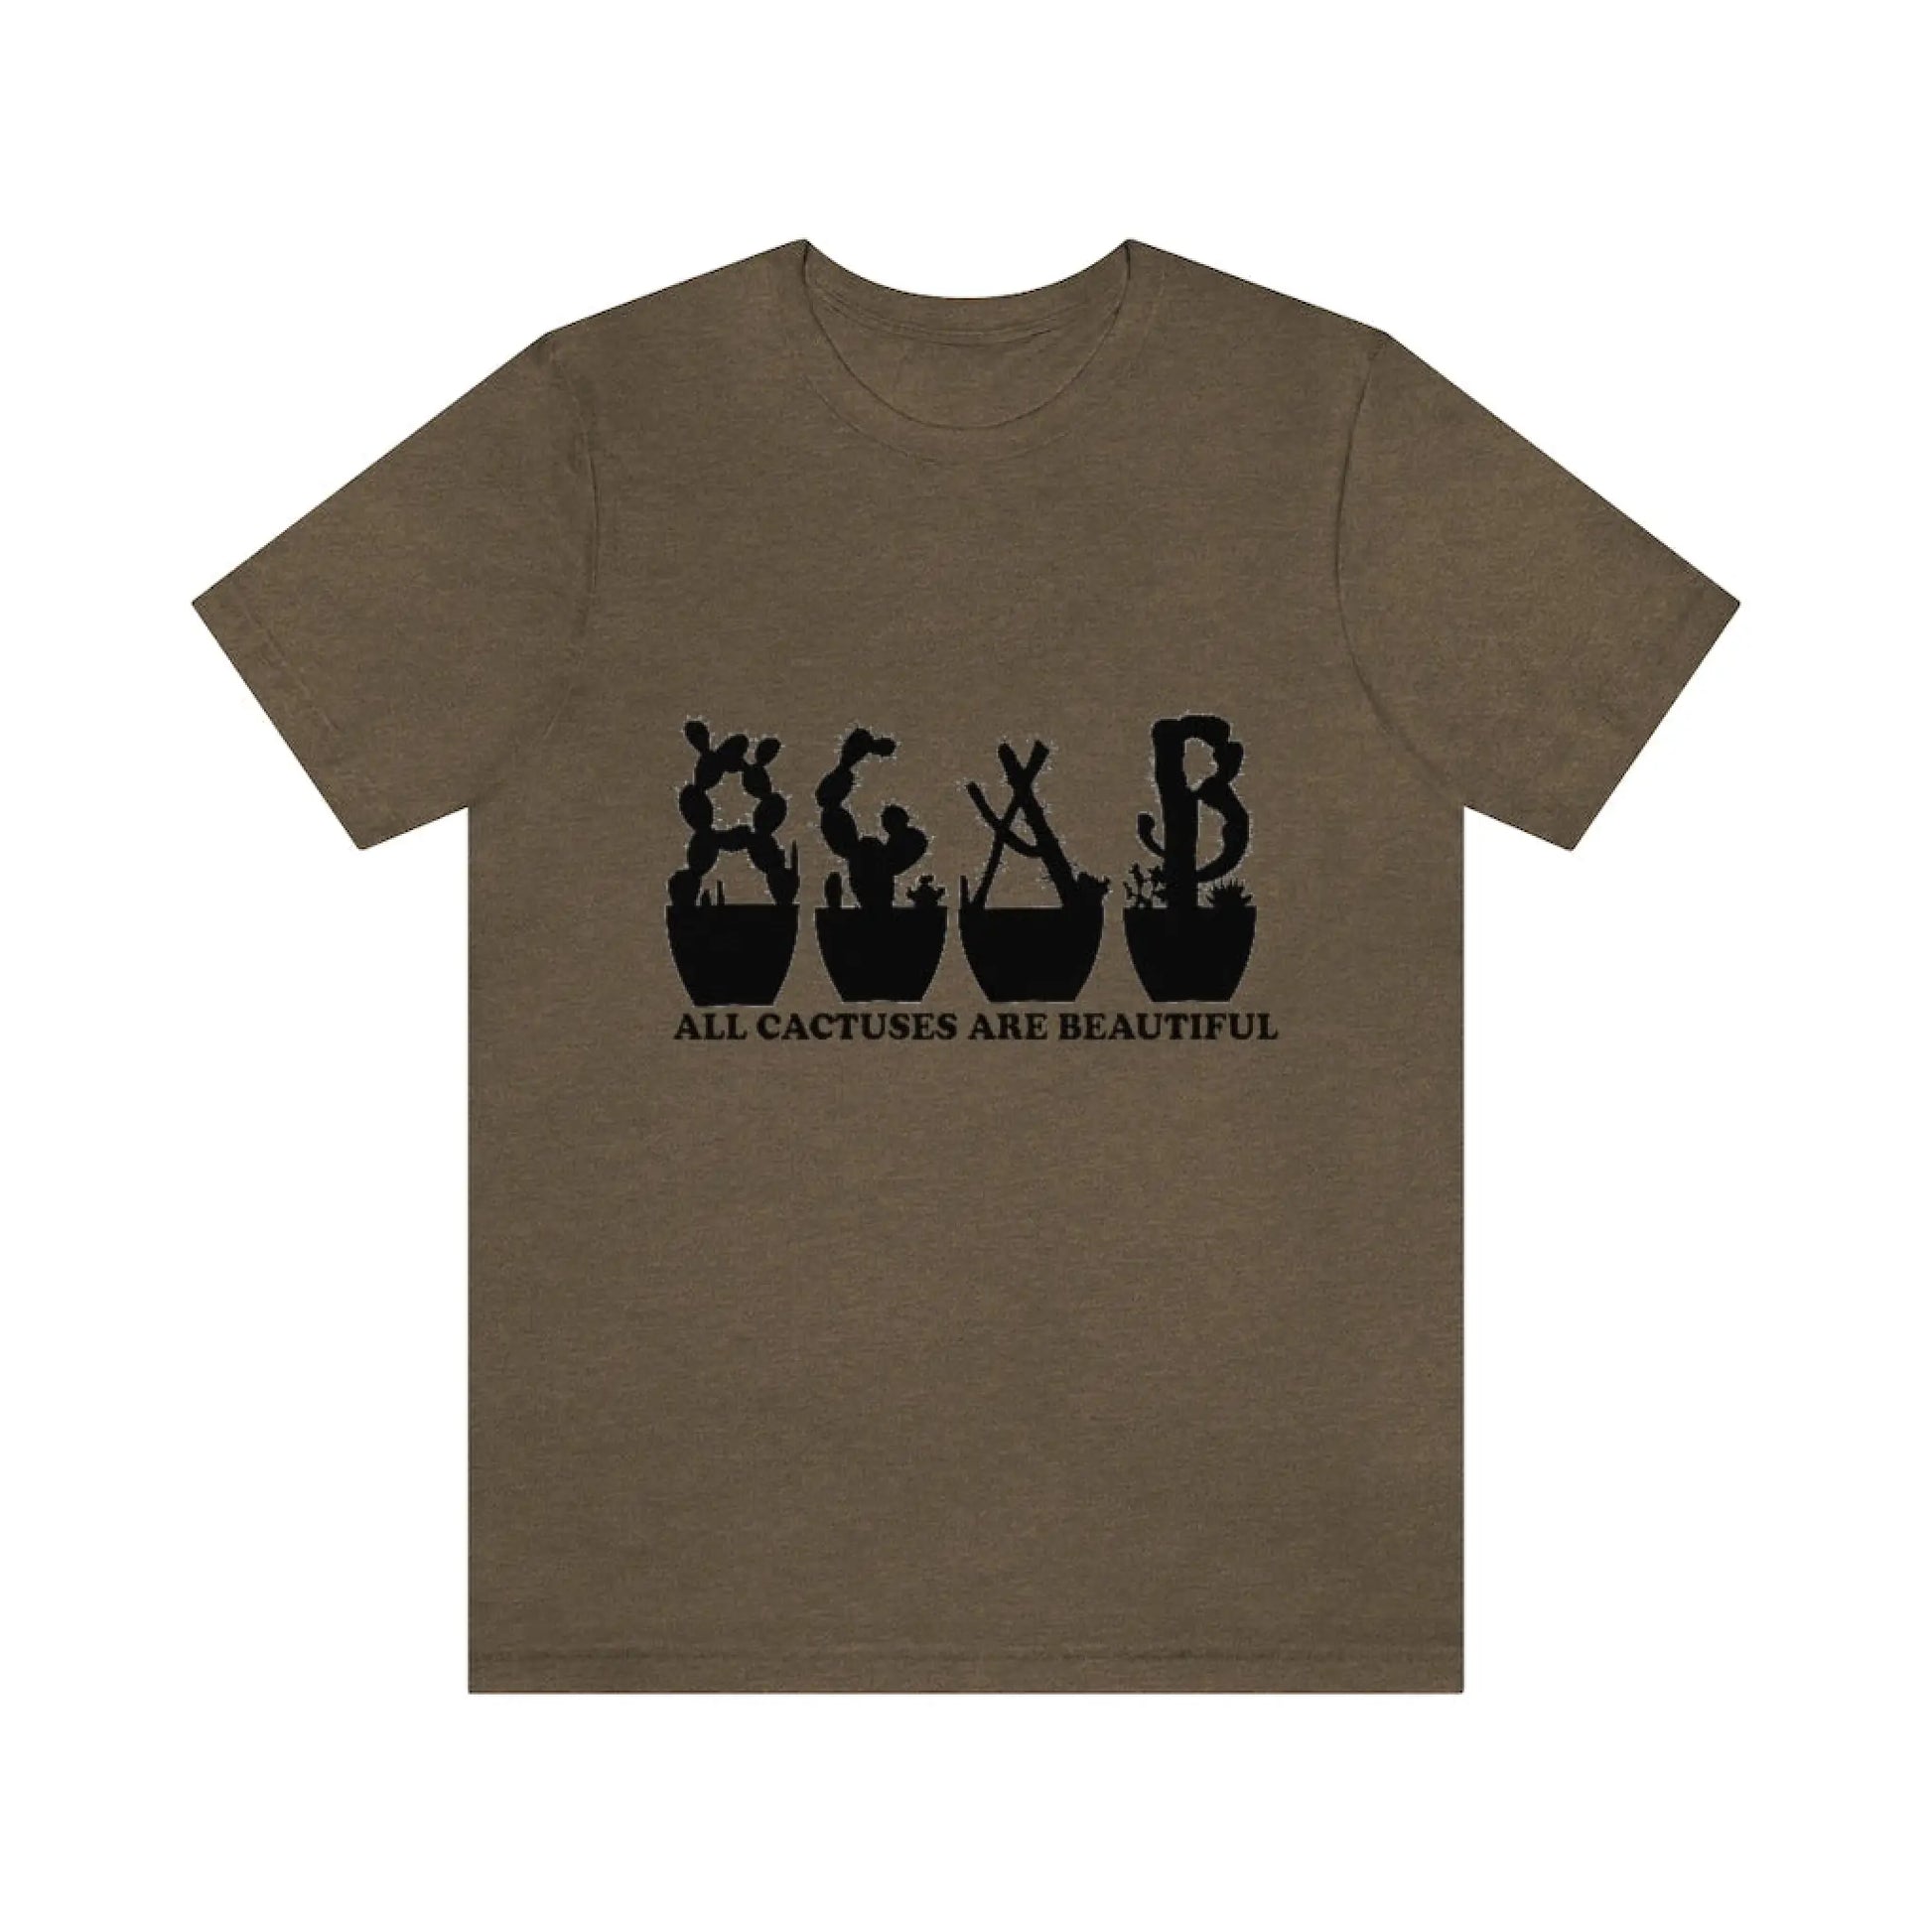 Shirts XL - All Cactuses Are Beautiful - Heather Olive /